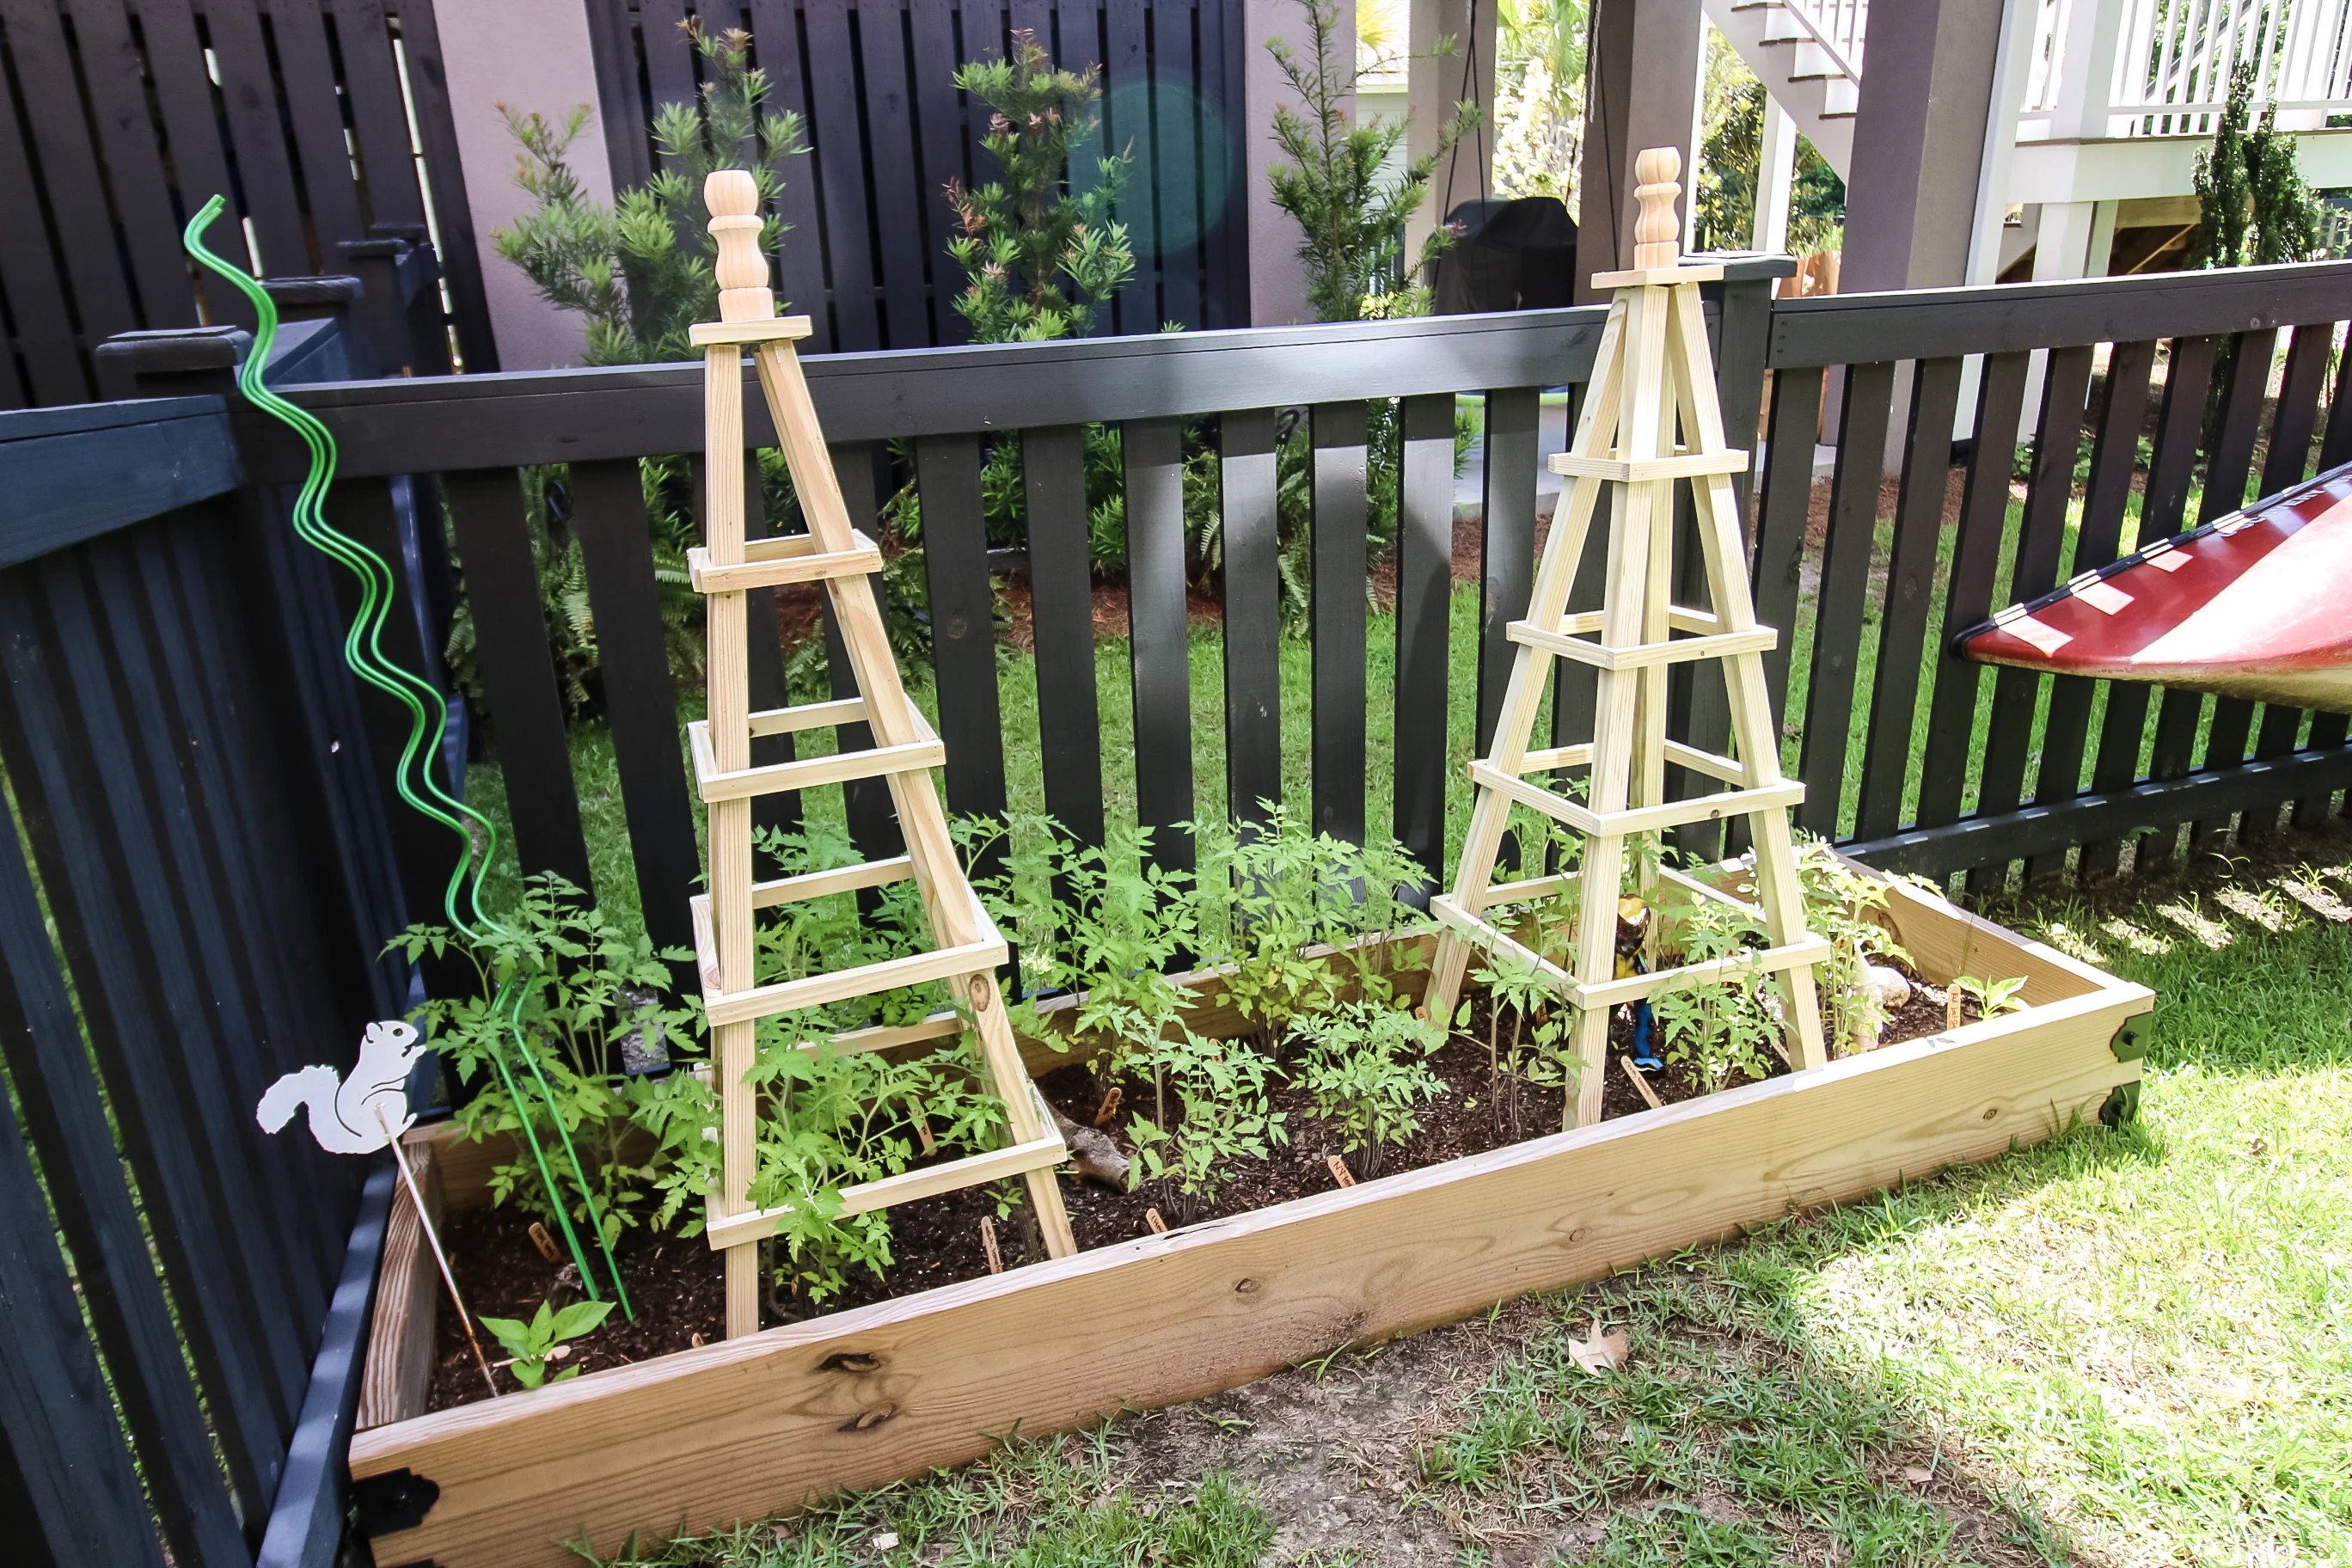 DIY tomato cages in raised bed